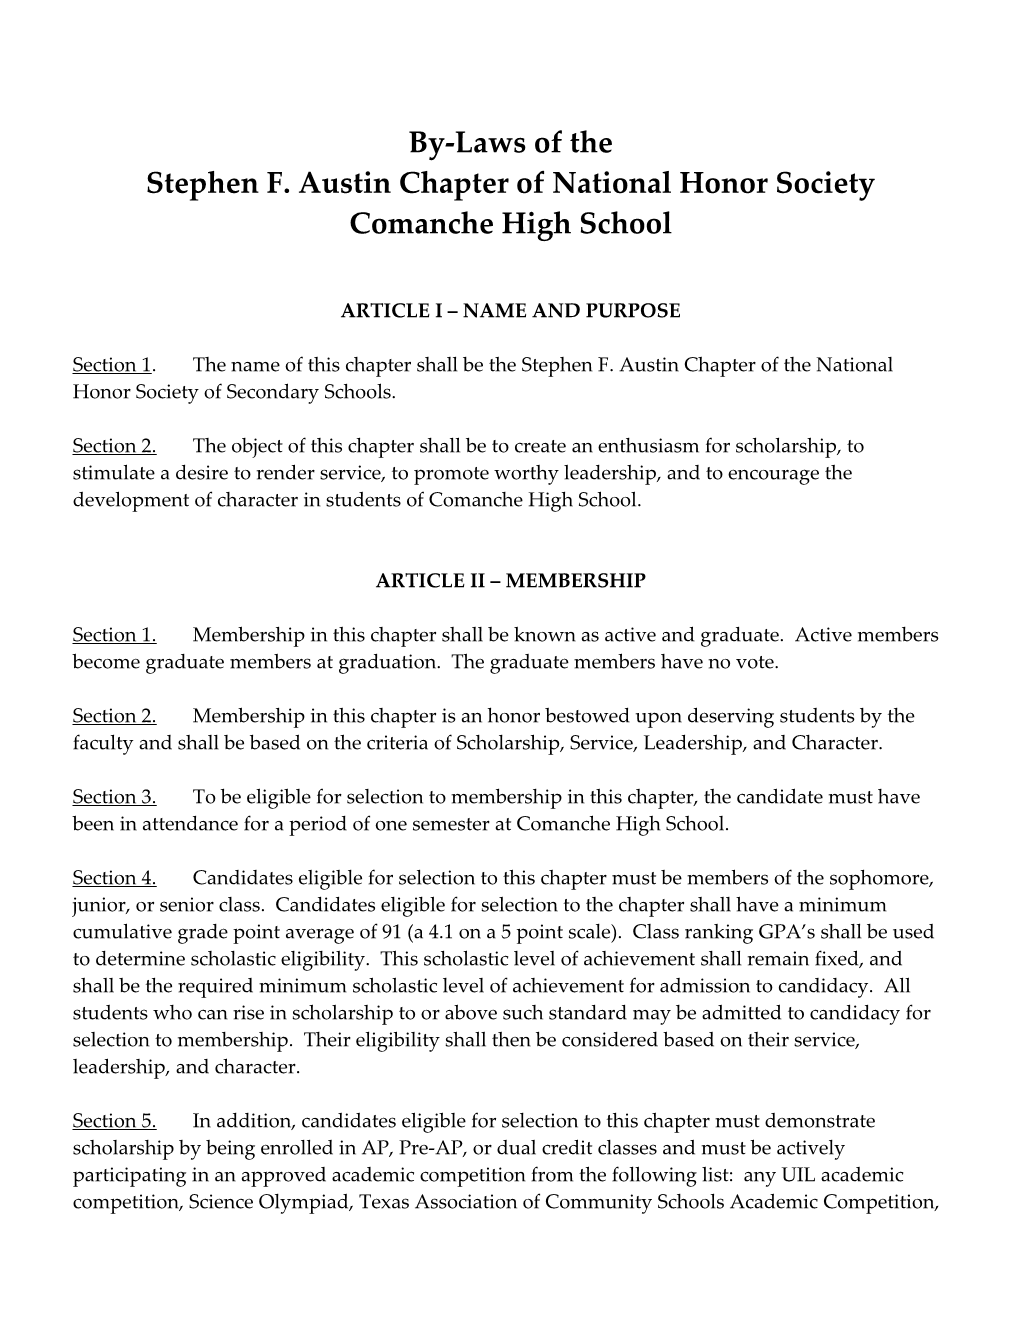 Stephen F. Austin Chapter of National Honor Society